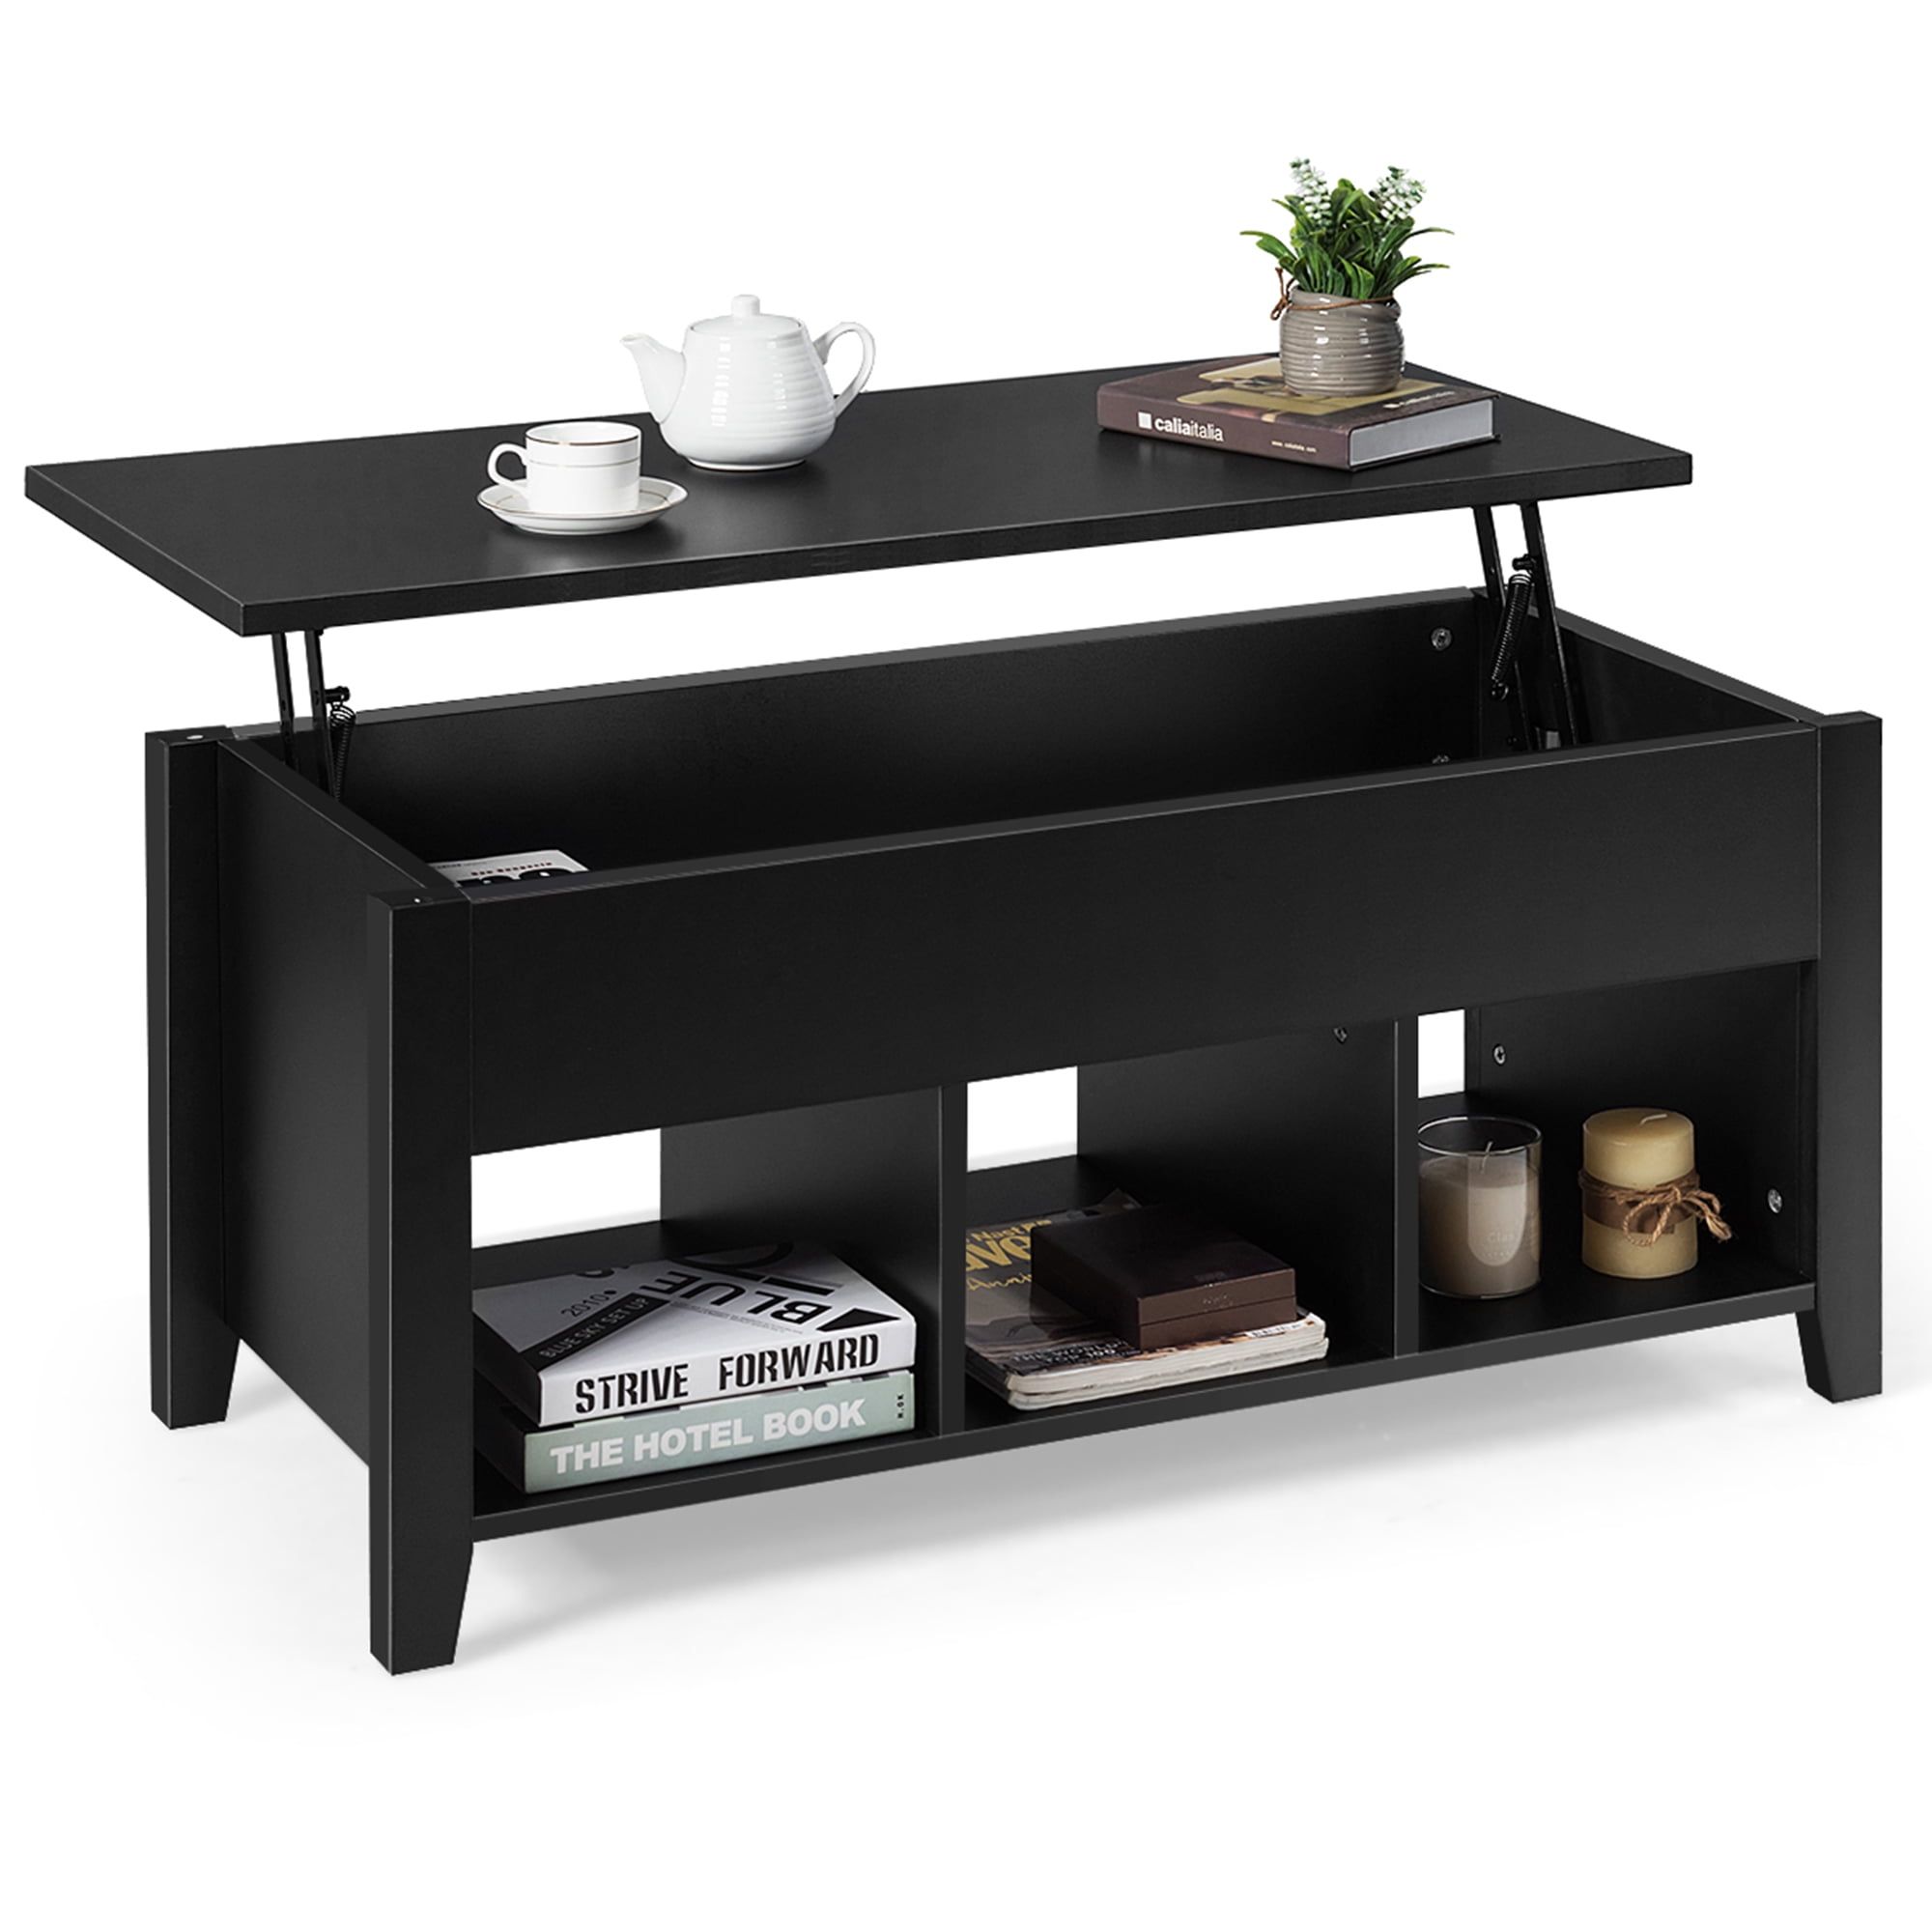 Gymax Lift Top Coffee Table W/ Storage Compartment Shelf Living Room Inside Lift Top Coffee Tables With Storage (View 11 of 15)